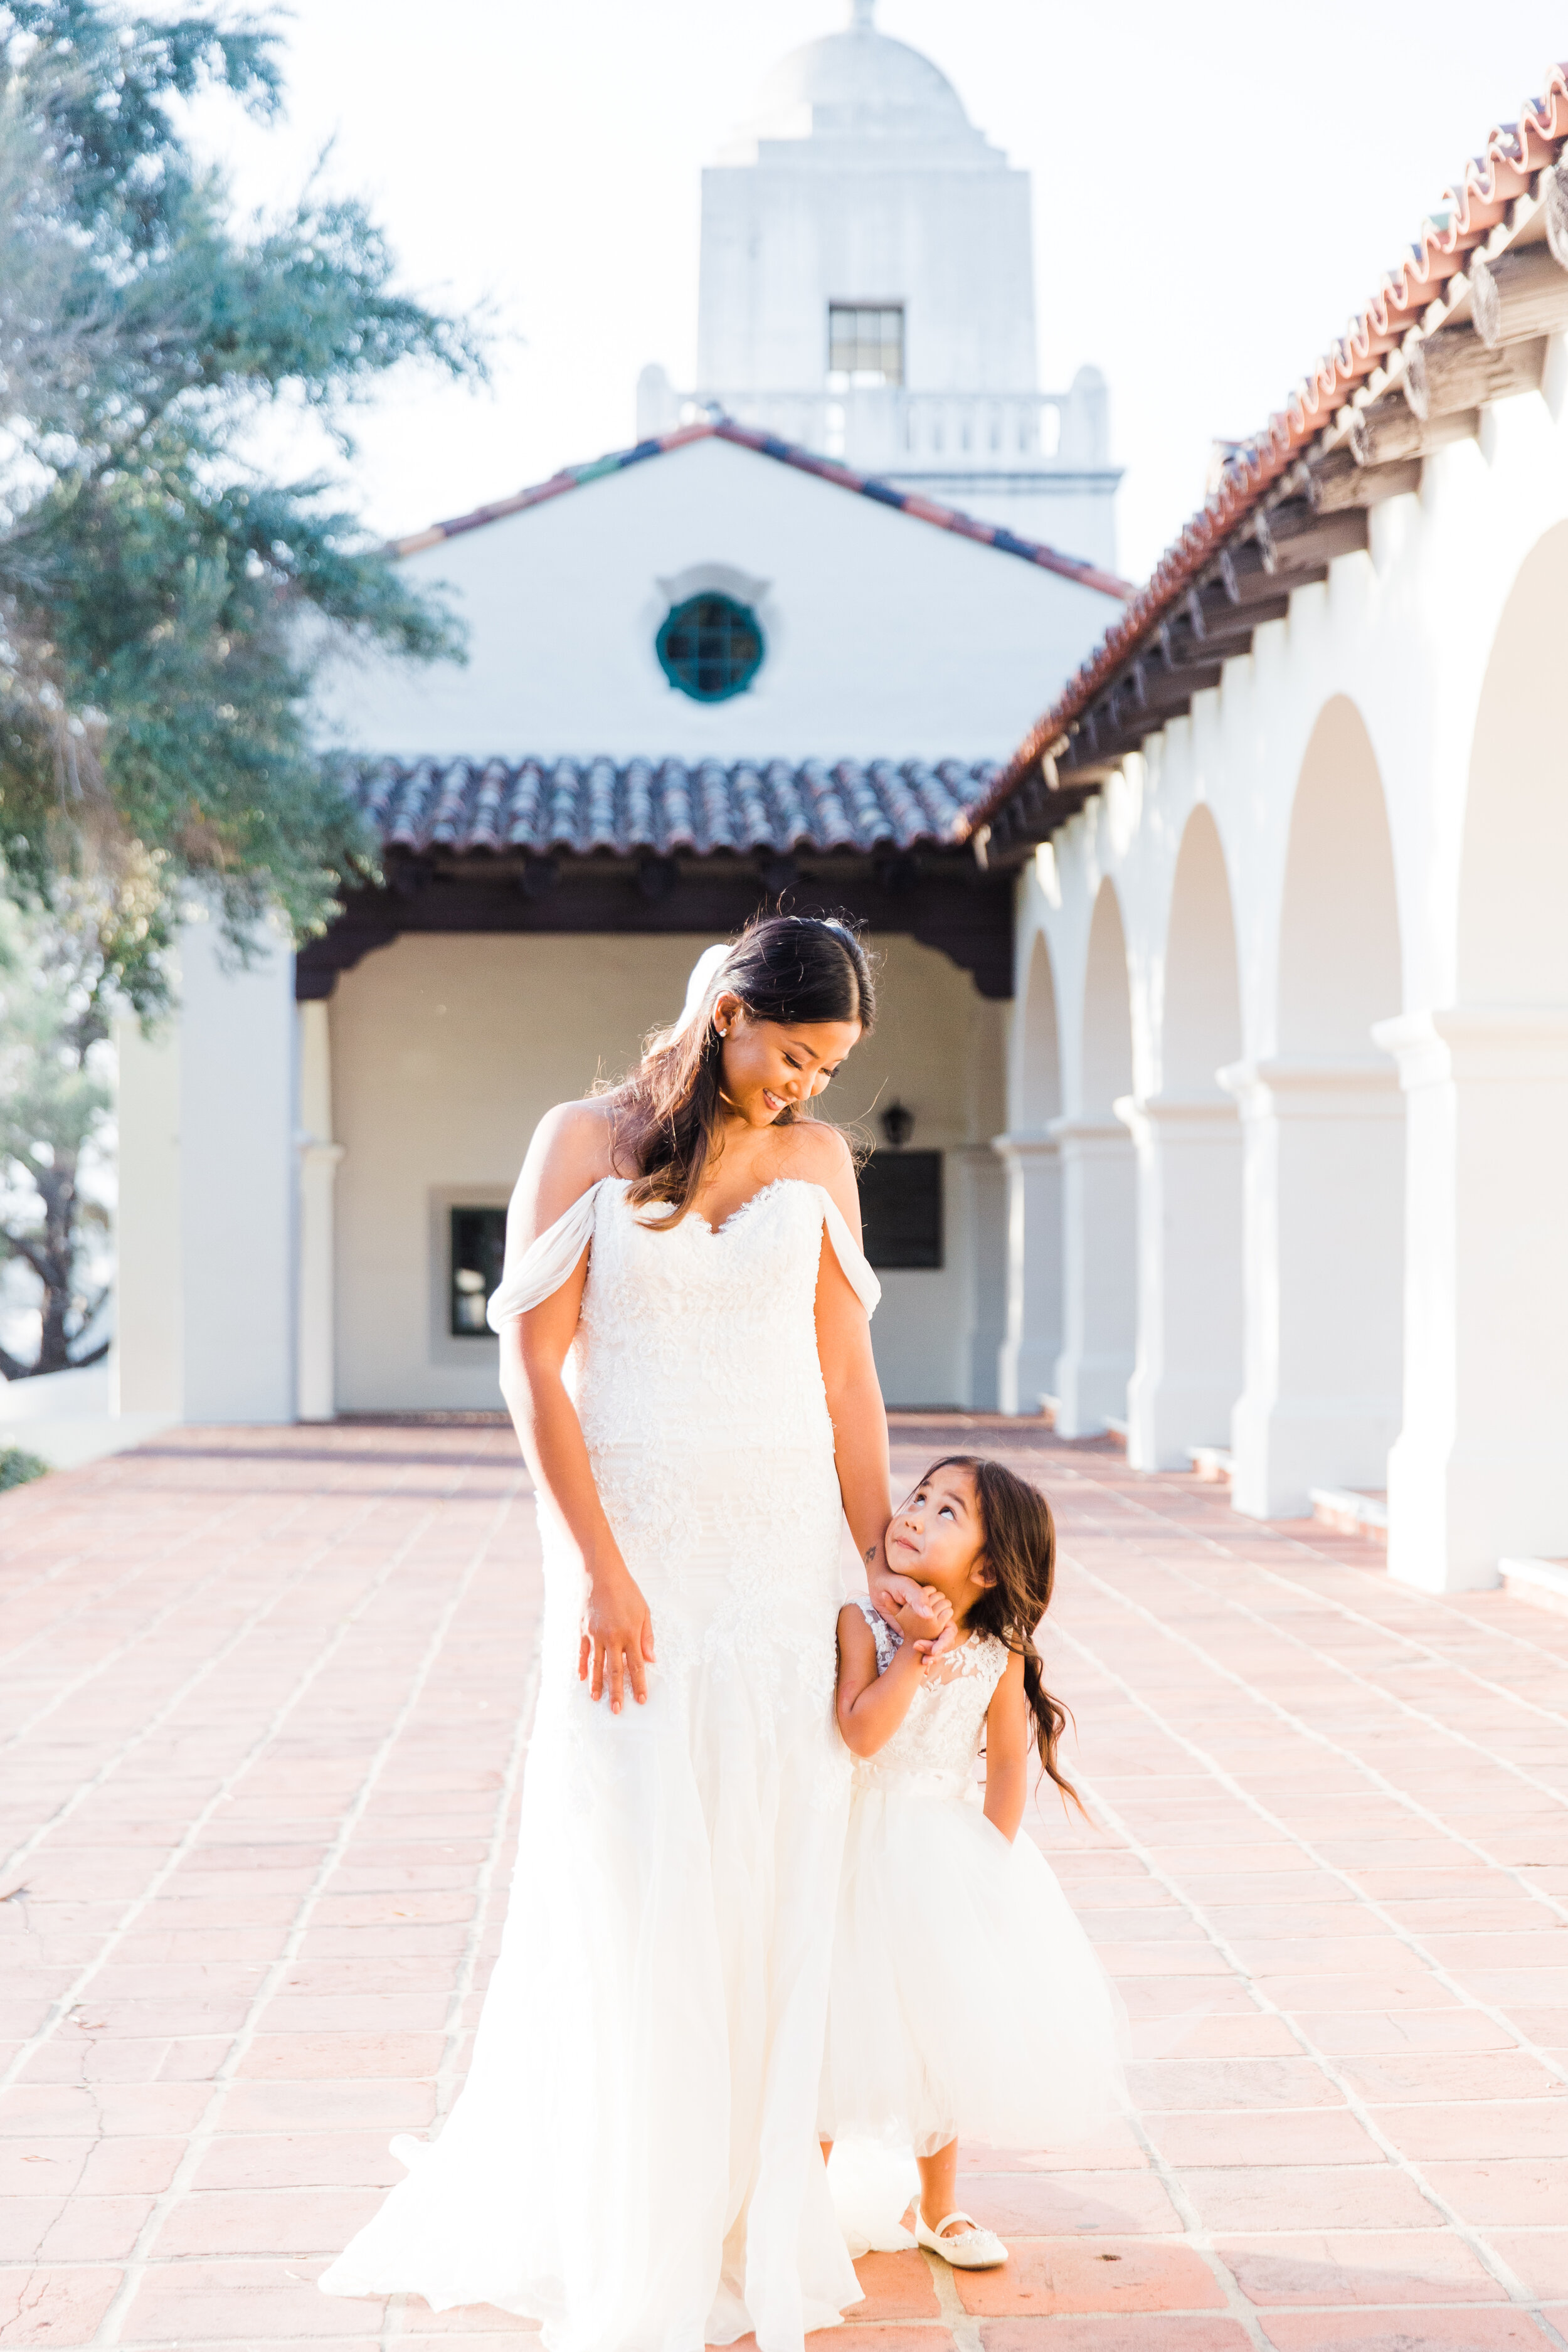 Bianca - Bride with her daughter photo